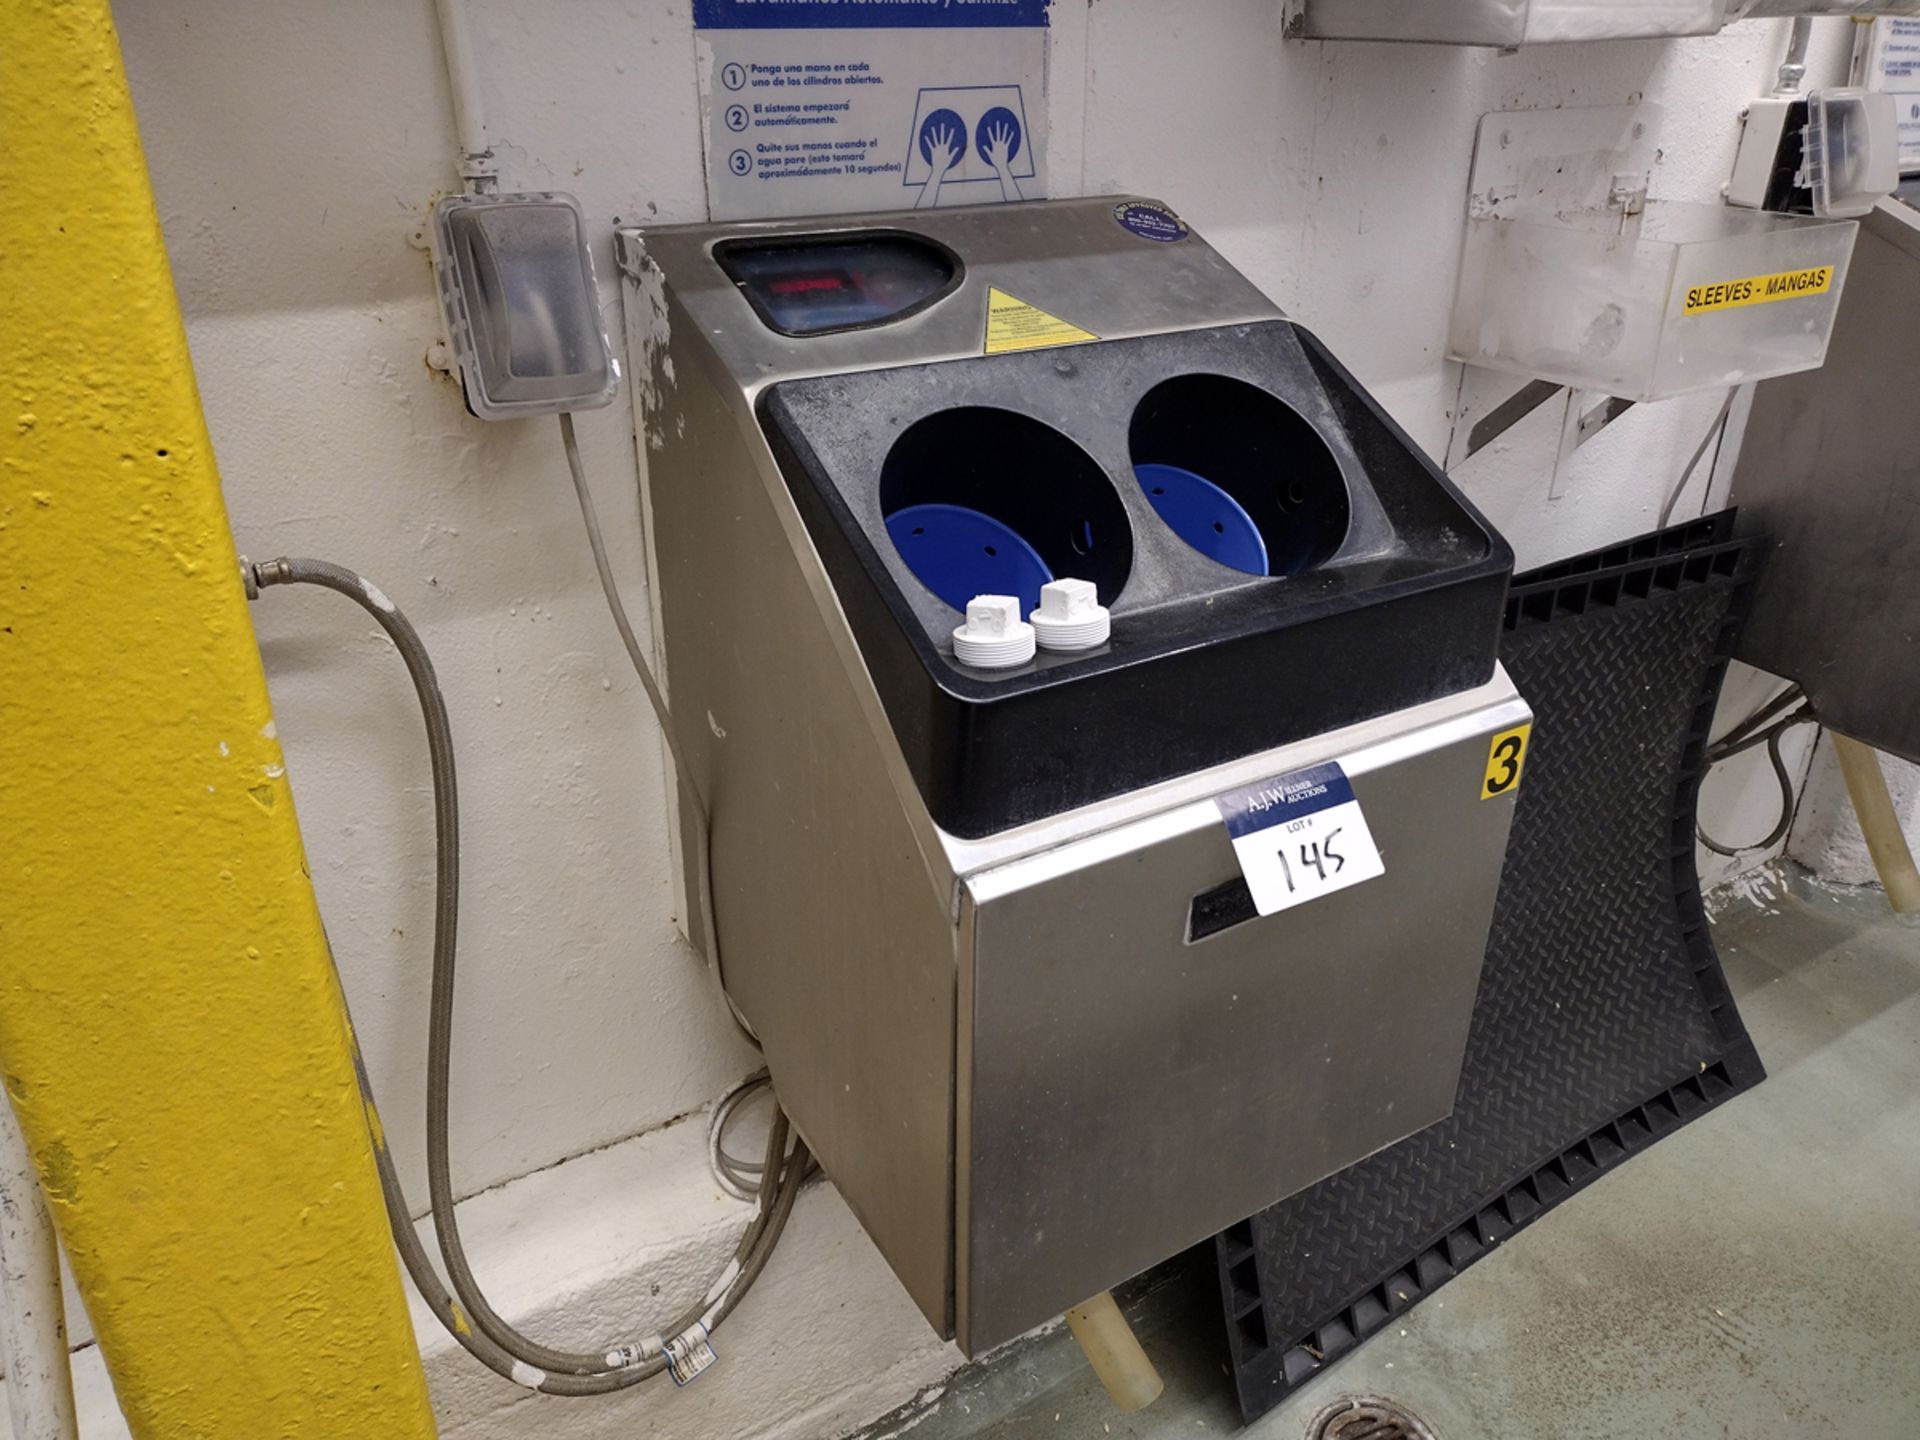 SINGLE-BAY, WALL-MOUNT CLEANTECH 500EZ AUTOMATED HANDWASHING STATION - Image 2 of 6